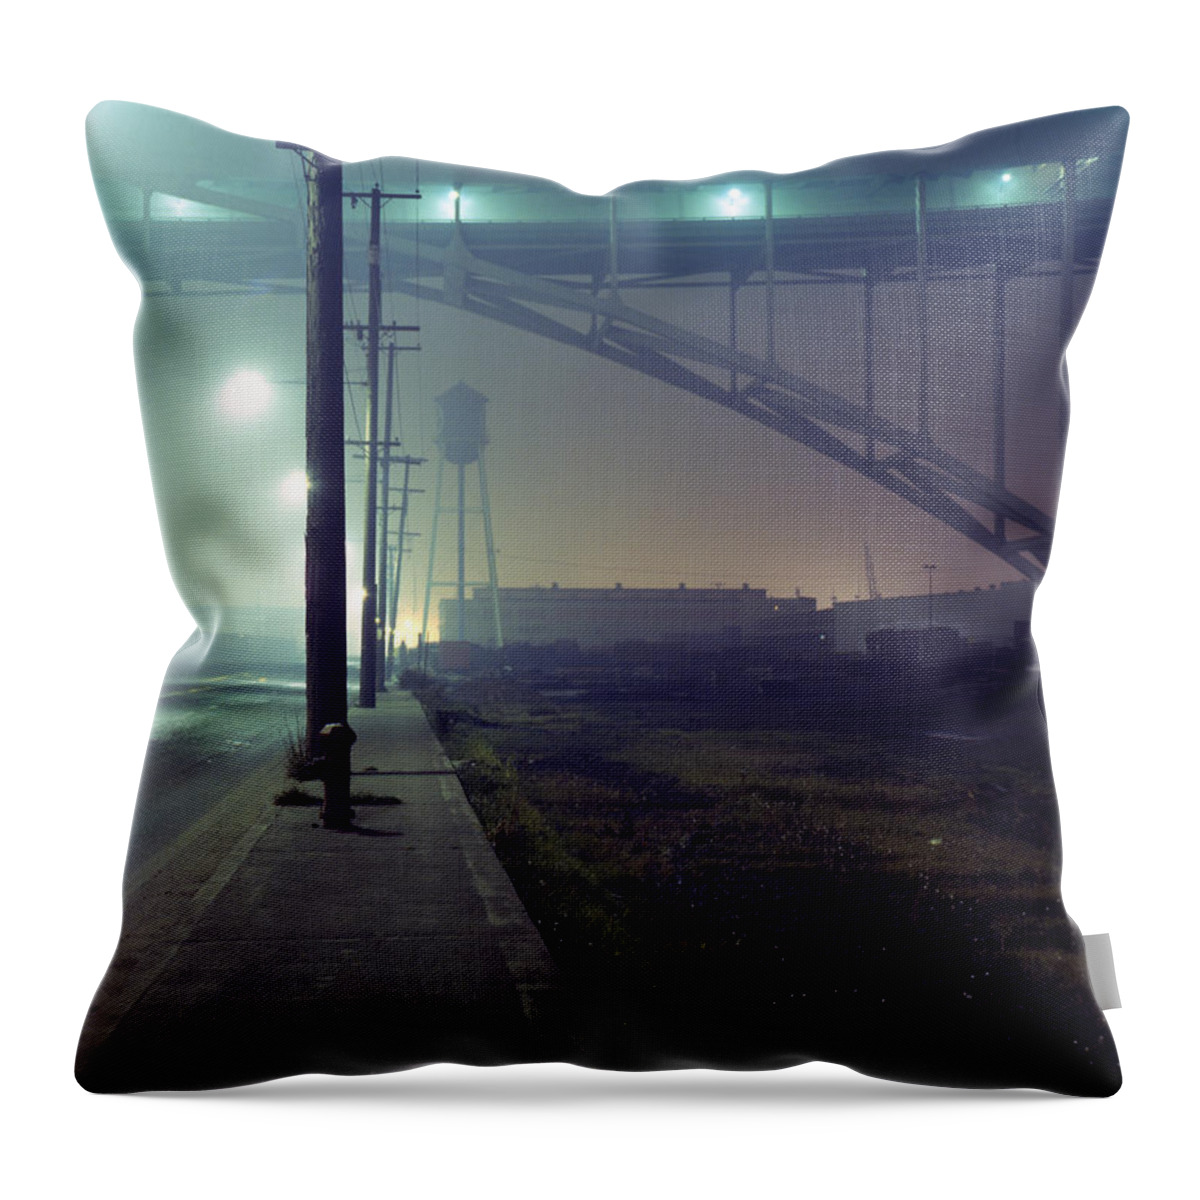 Night Photo Throw Pillow featuring the photograph Nightscape 2 by Lee Santa